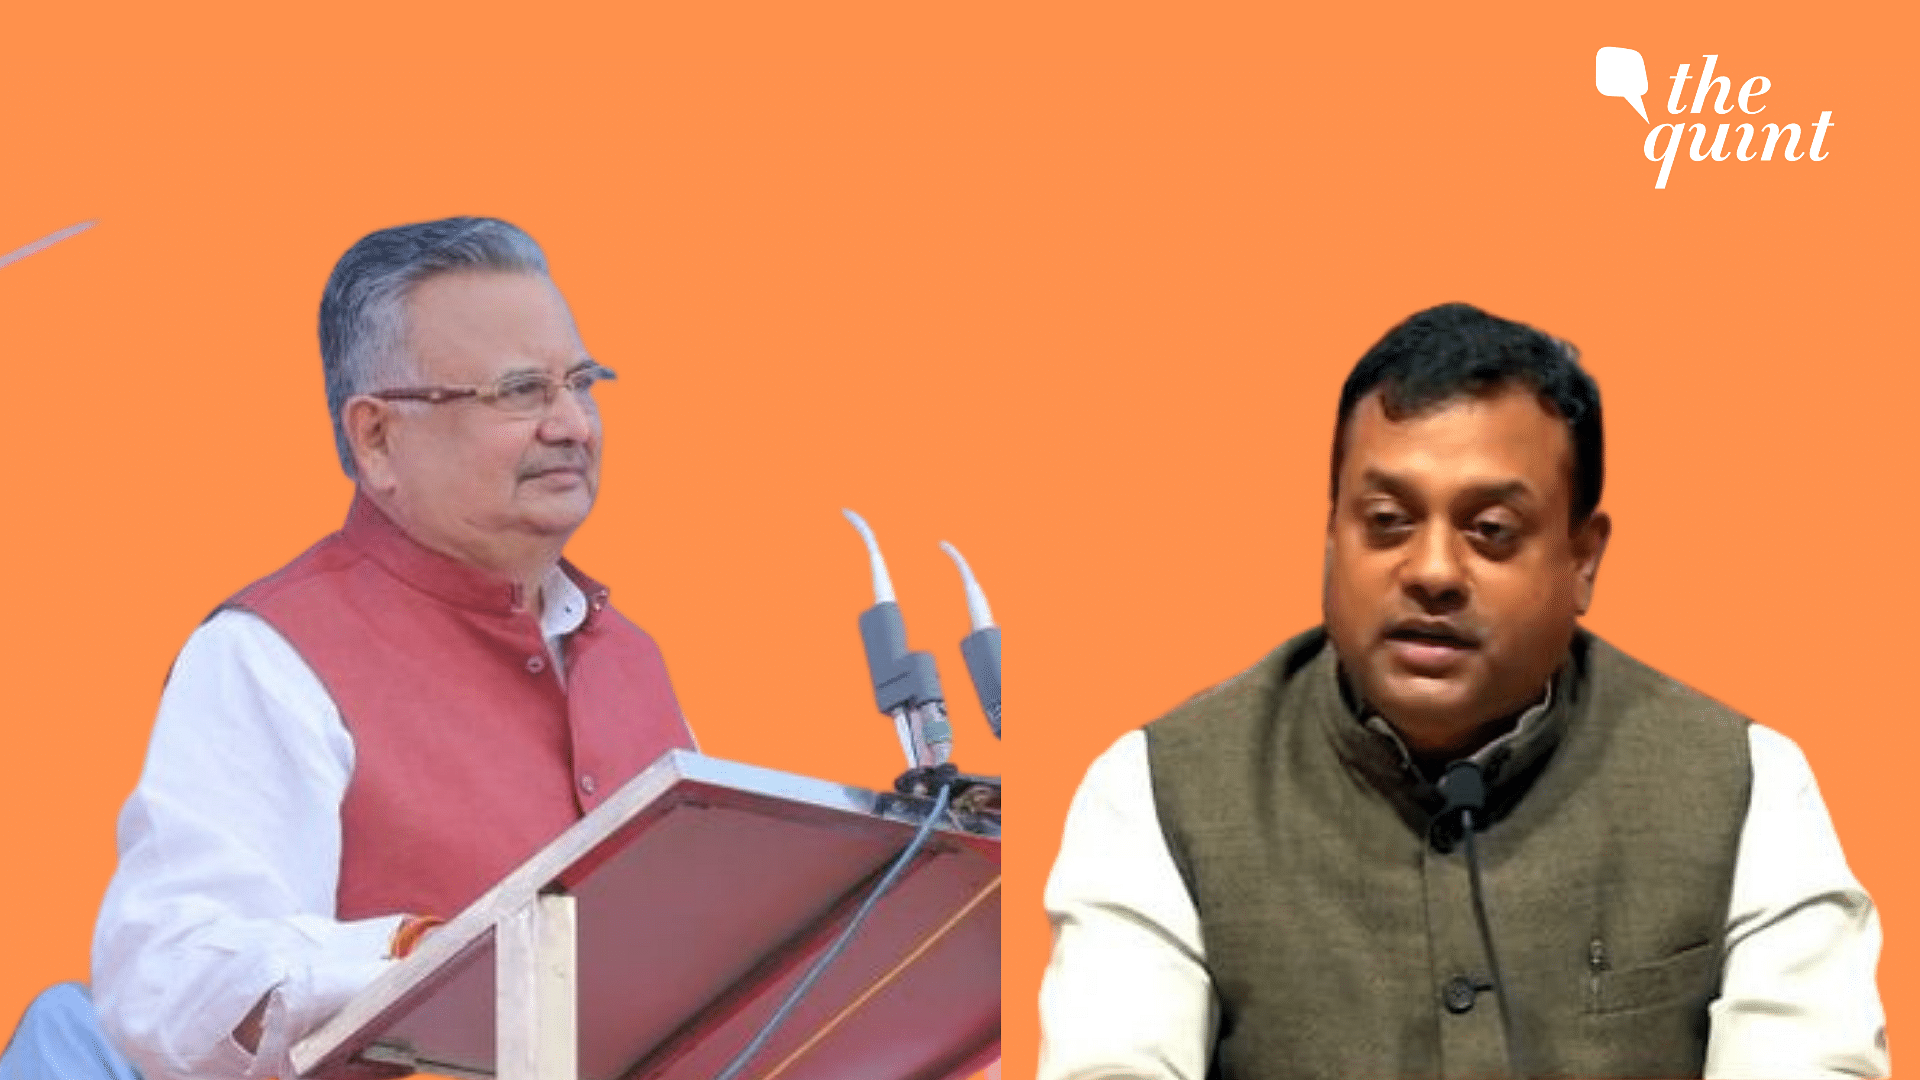 <div class="paragraphs"><p>The Chhattisgarh High Court on Monday, 14 June, stayed the probe into the toolkit FIR filed against Bharatiya Janata Party (BJP) leaders Raman Singh and Sambit Patra citing “malafides or political grudge”. The probe has been stayed till the next hearing scheduled for 14 June.</p></div>